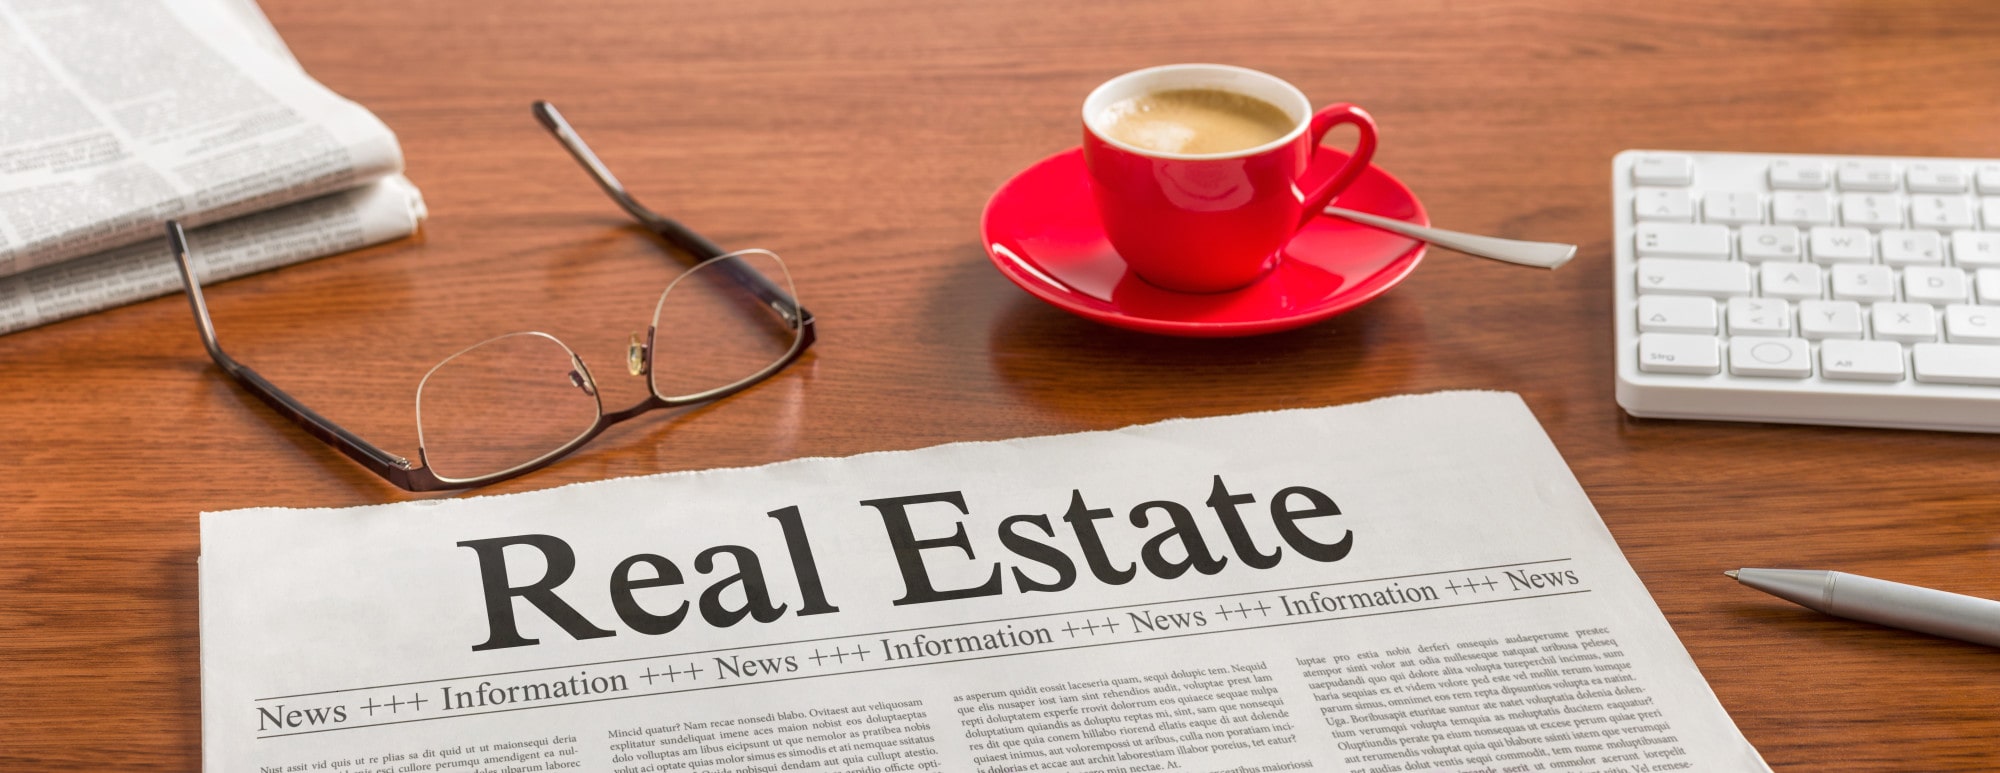 4 Myths About Real Estate Investing That May Be Holding You Back